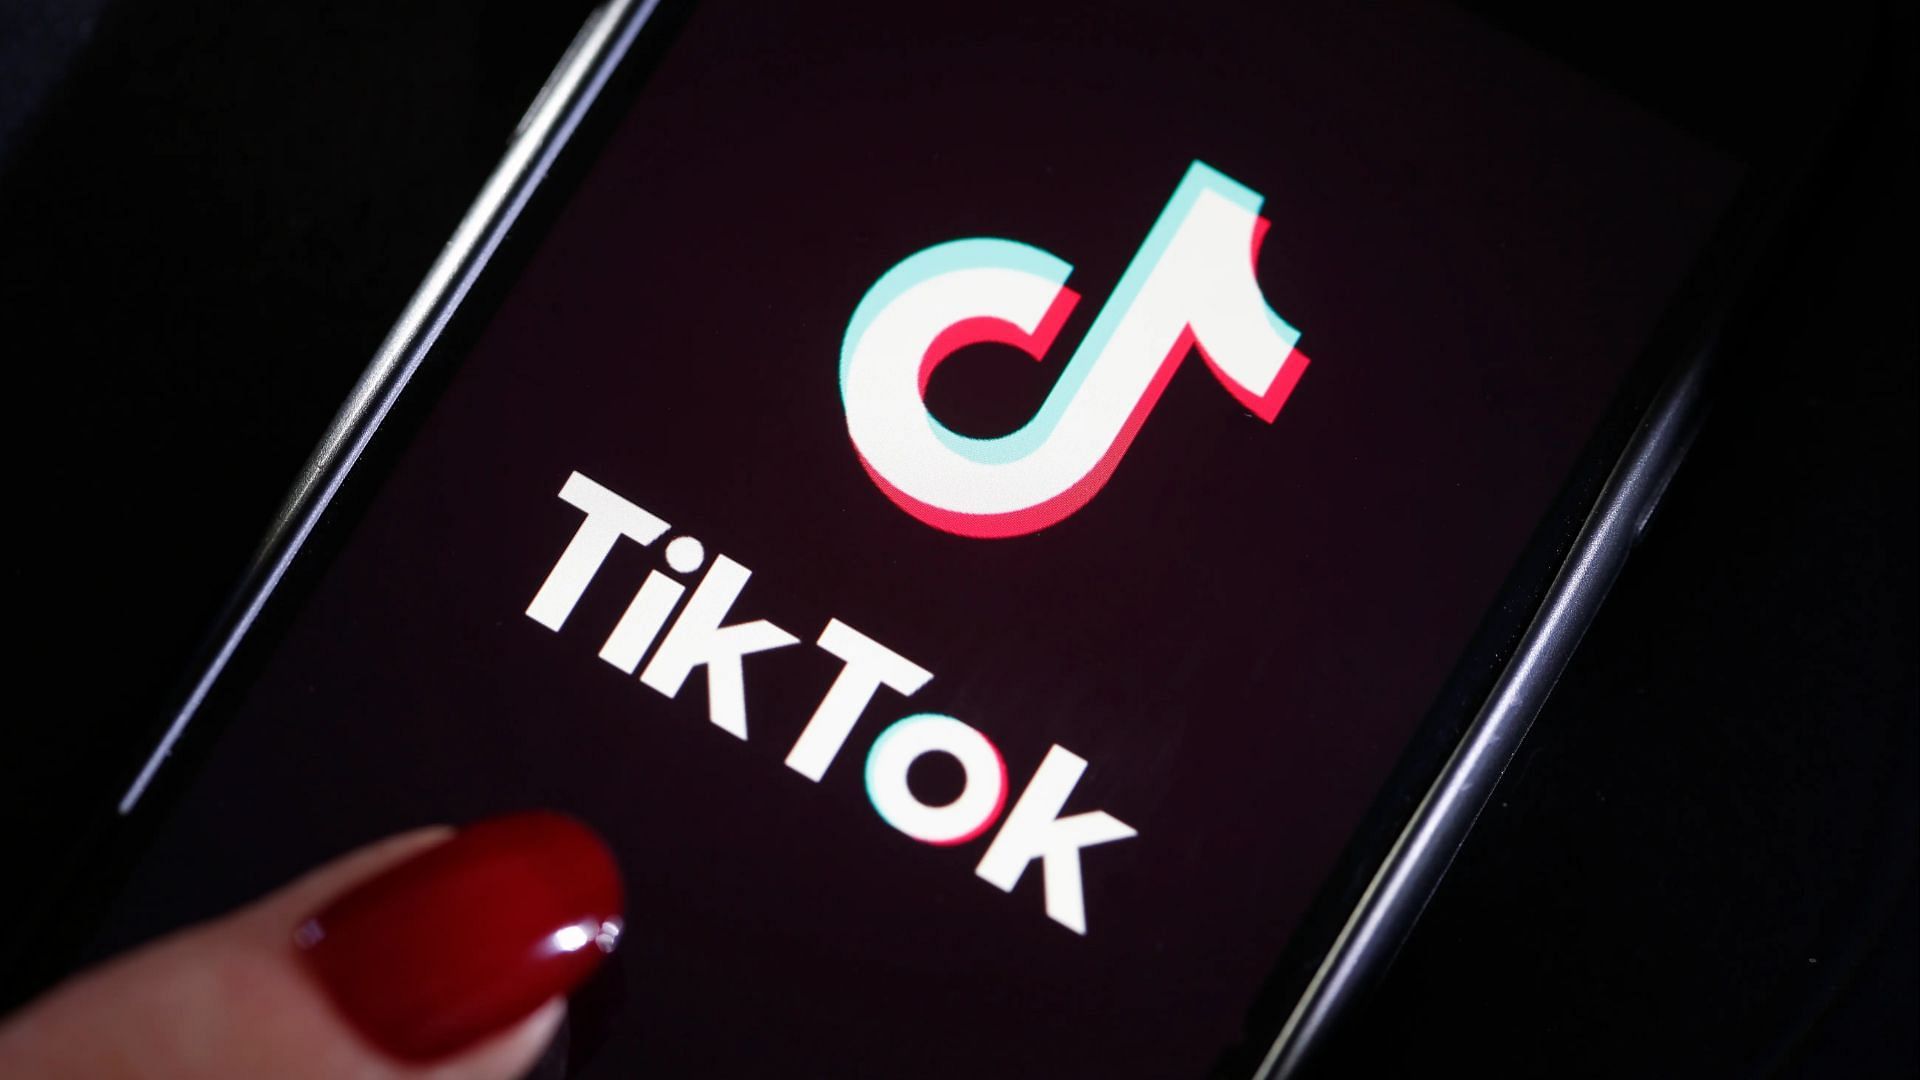 The Complete Guide to TikTok Gift Prices: How Much are TikTok Gifts Worth?